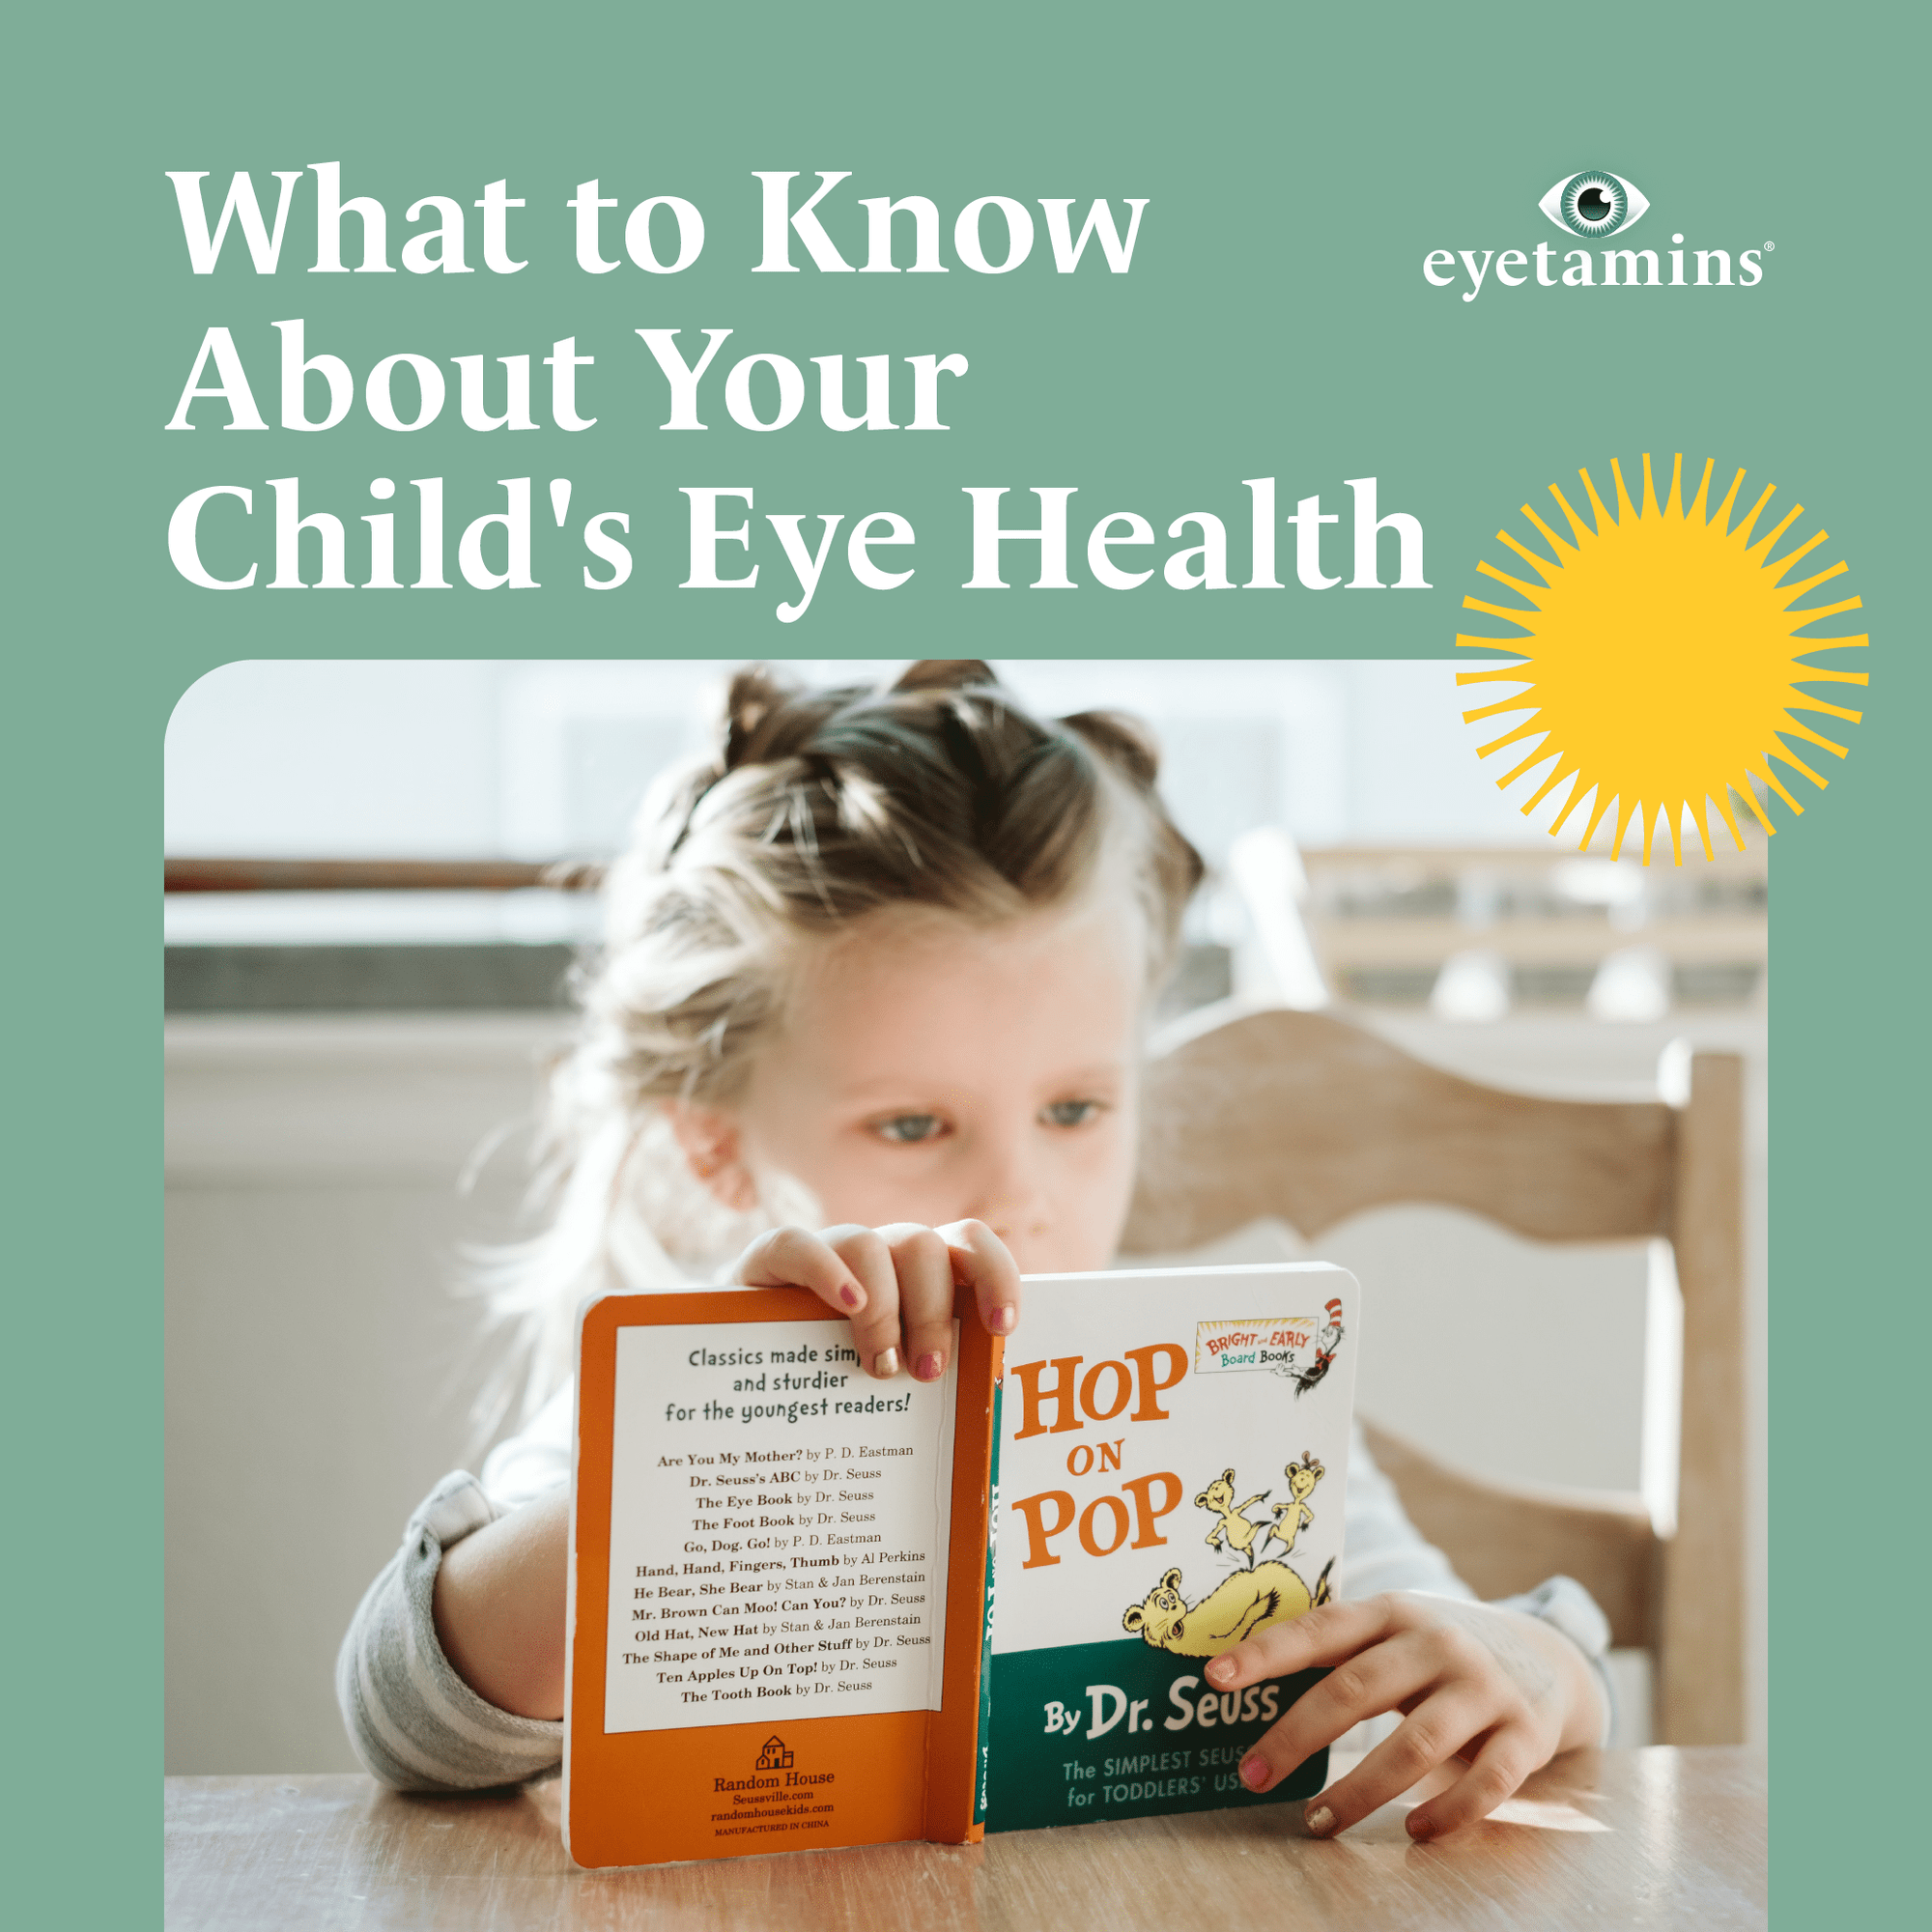 Eyetamins - What to Know About Your Child's Eye Health